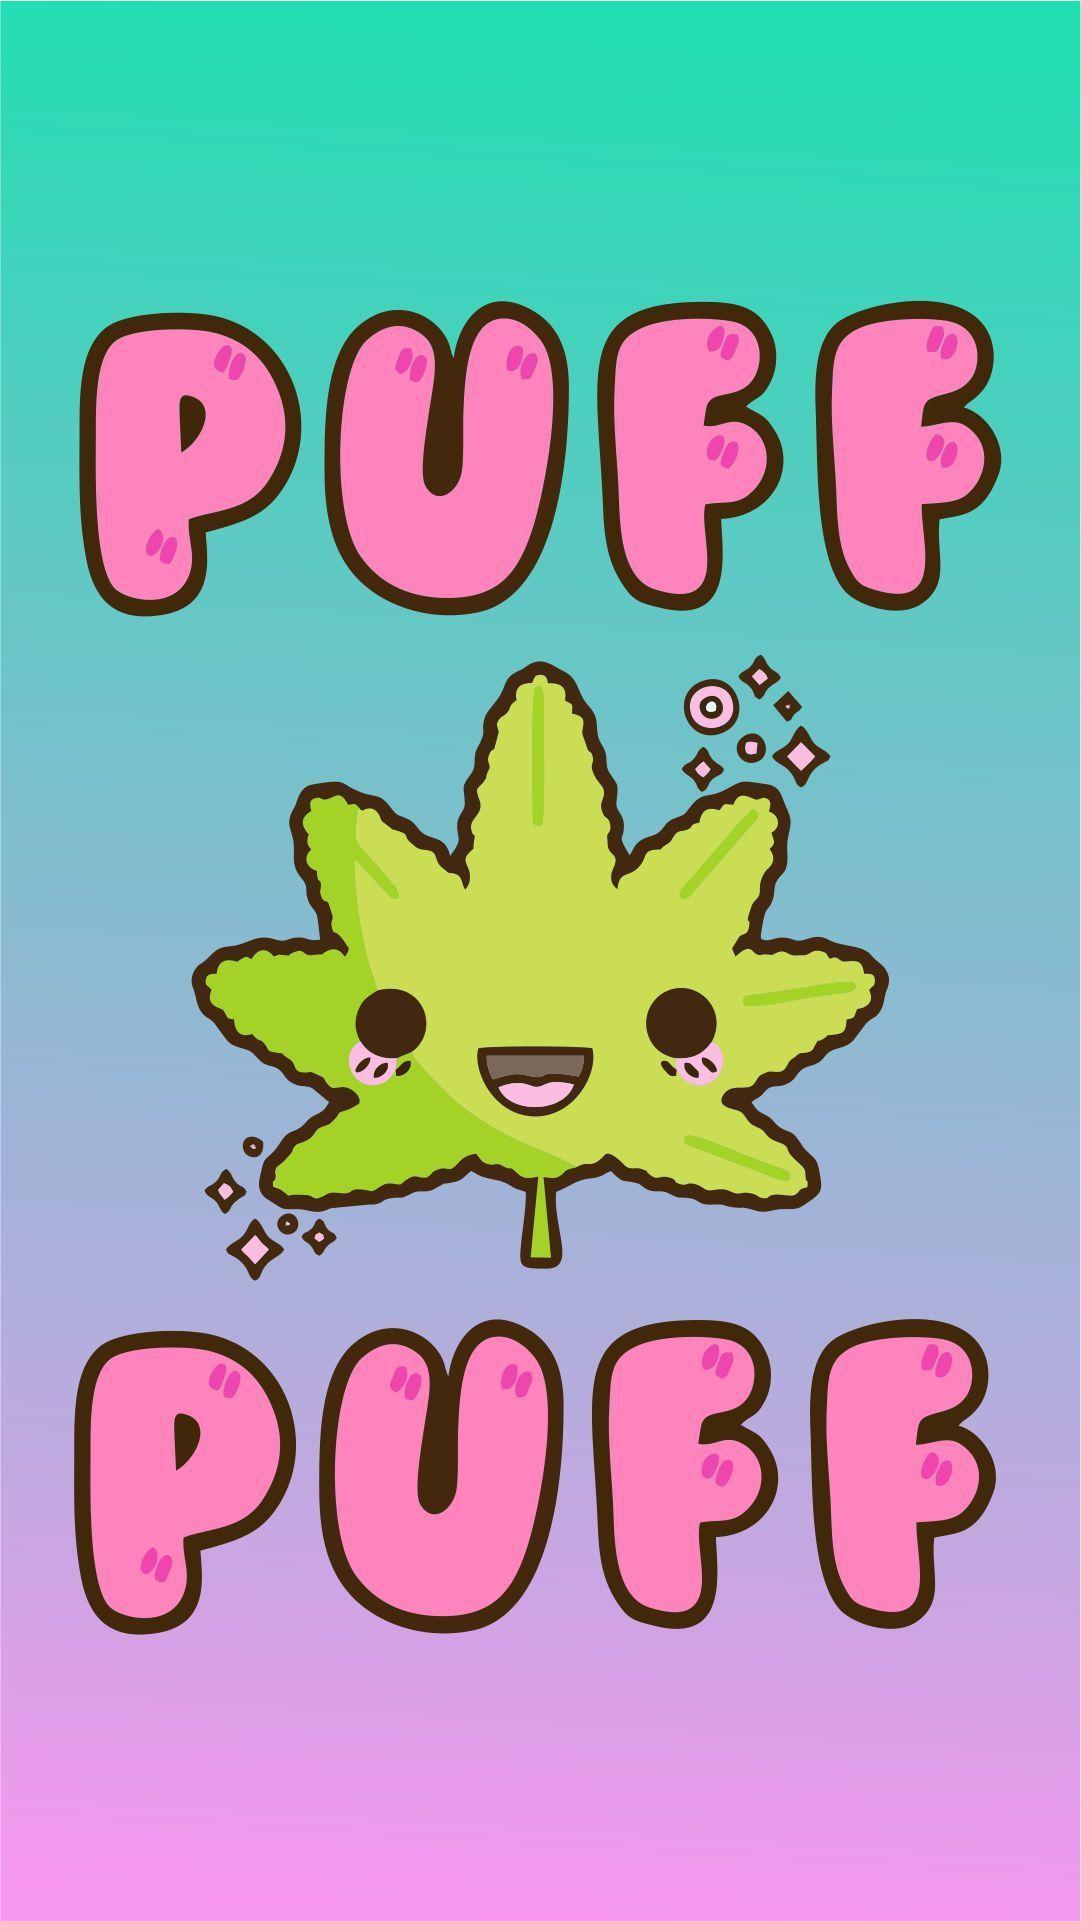 Cute Stoner Wallpapers Top Free Cute Stoner Backgrounds Wallpaperaccess Choose your favorite stoner drawings from millions of available designs. cute stoner wallpapers top free cute